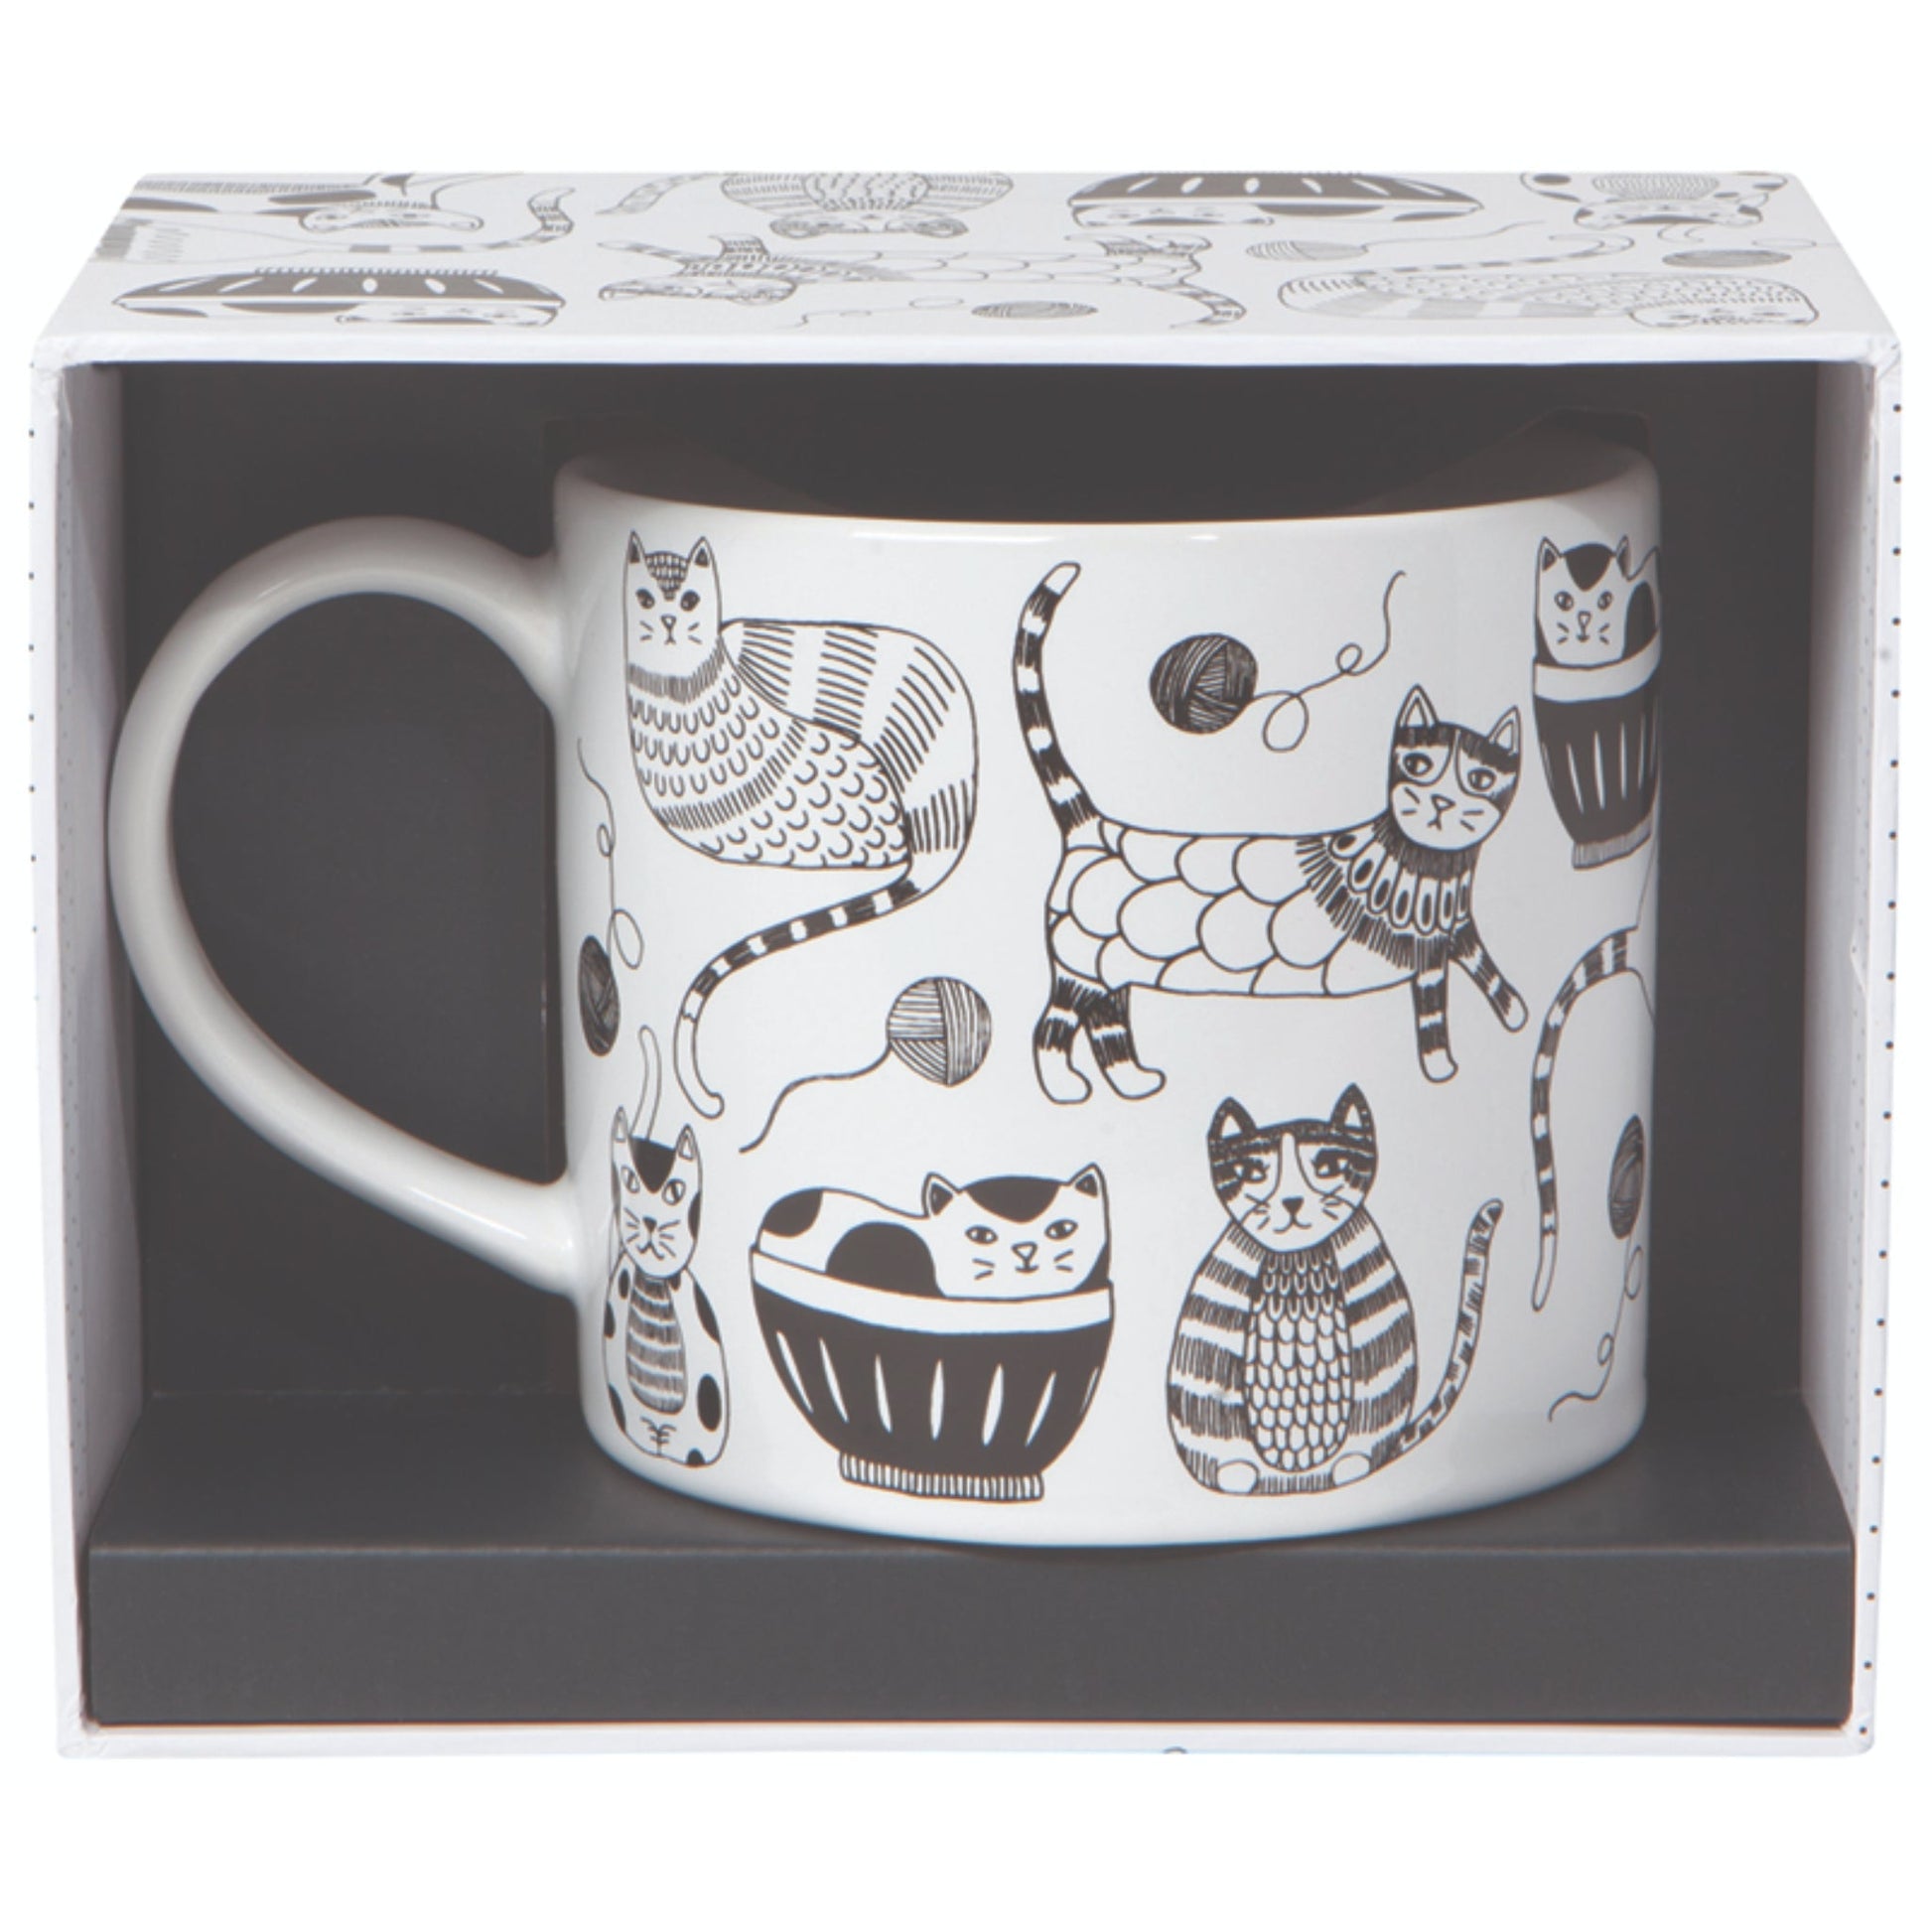 "Purr Party": Mug In A Box - Tiny Tiger Gift Shop